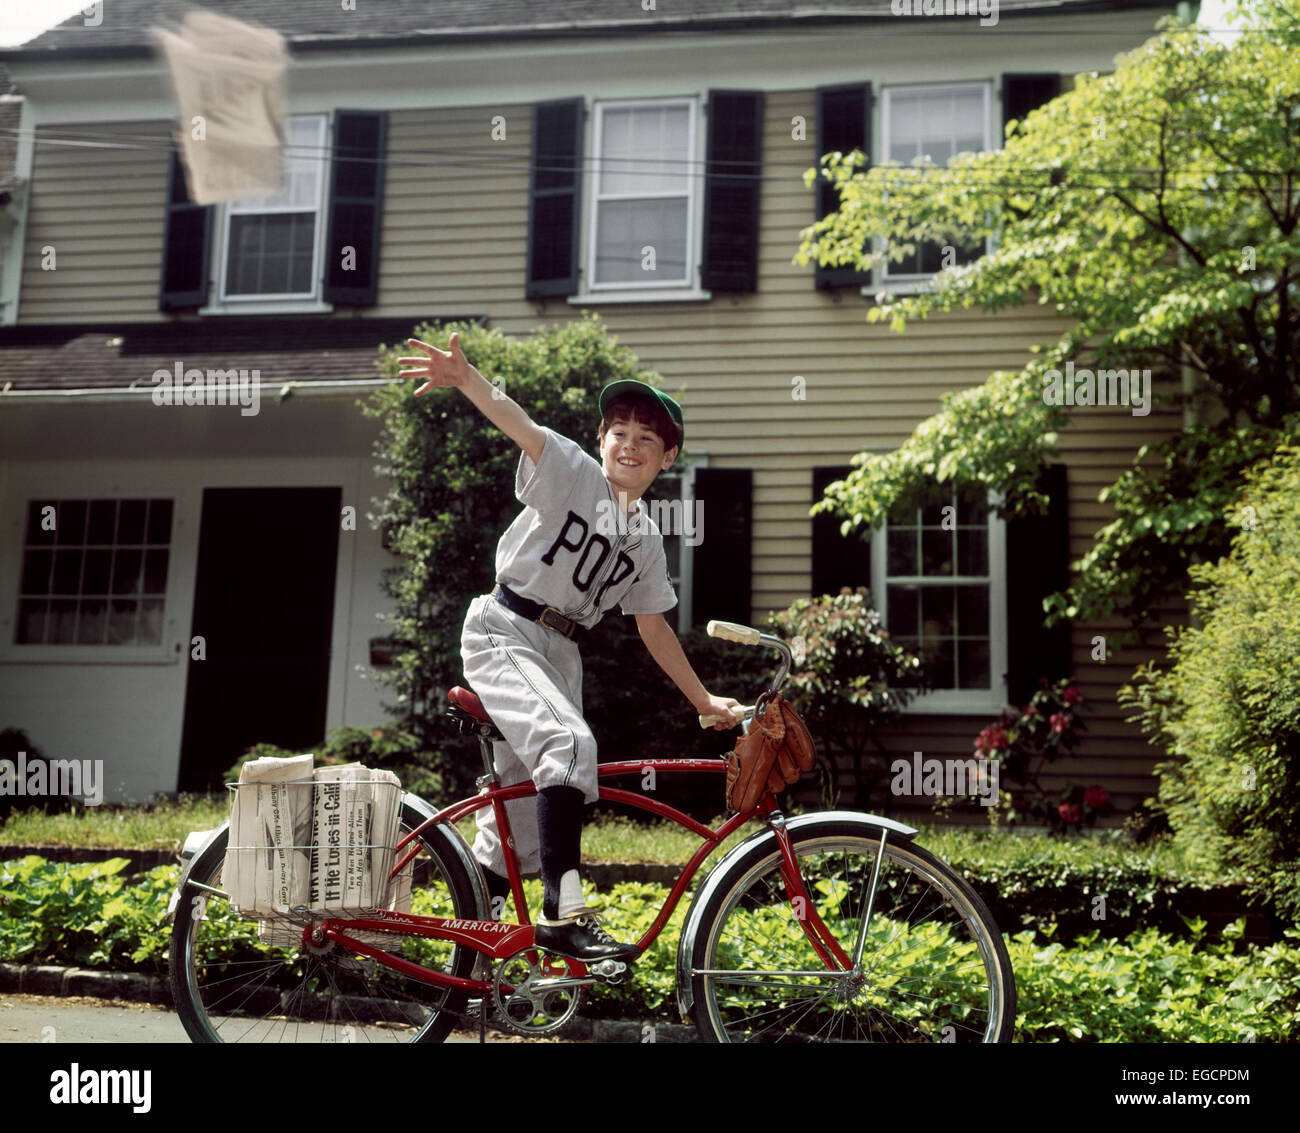 1960s BOY IN BASEBALL UNIFORM RIDING BICYCLE DELIVERING NEWSPAPERS Stock Photo